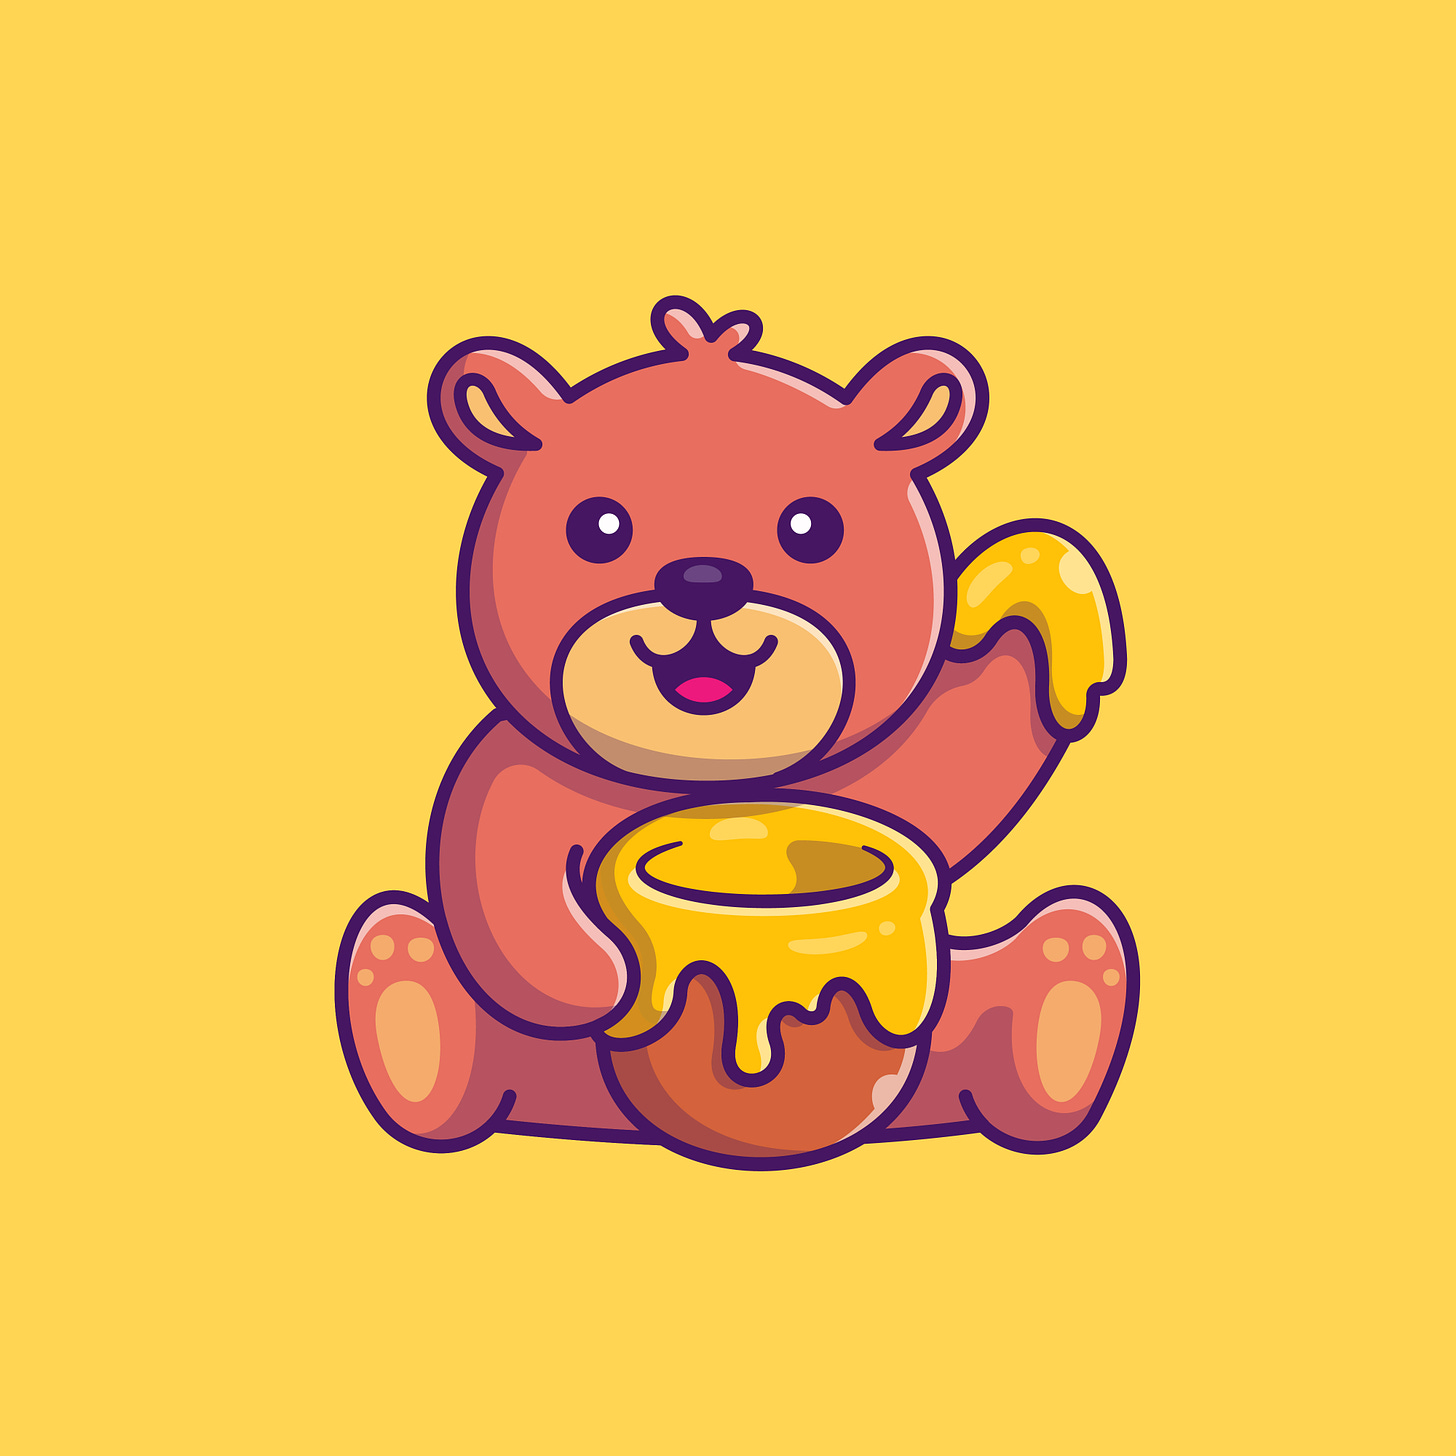 Cartoon image of a cute bear, his paw covered in honey, waving with a smile.